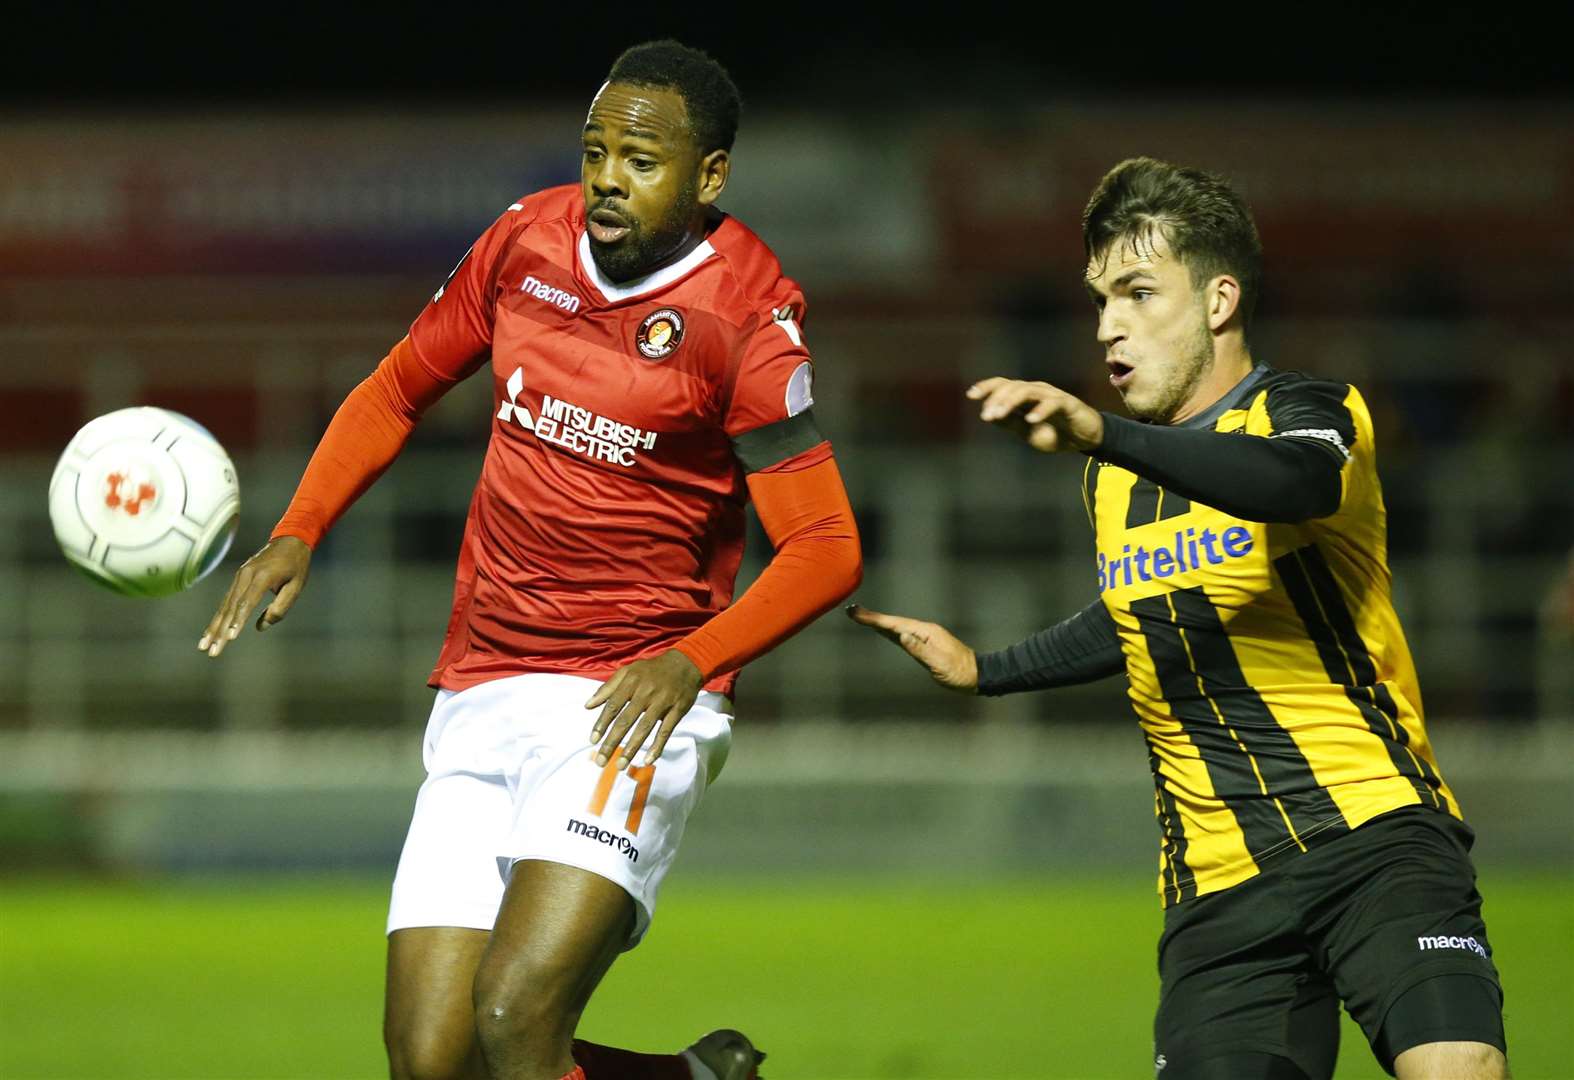 Jack Doyle in action for Maidstone at Ebbsfleet Picture: Andy Jones